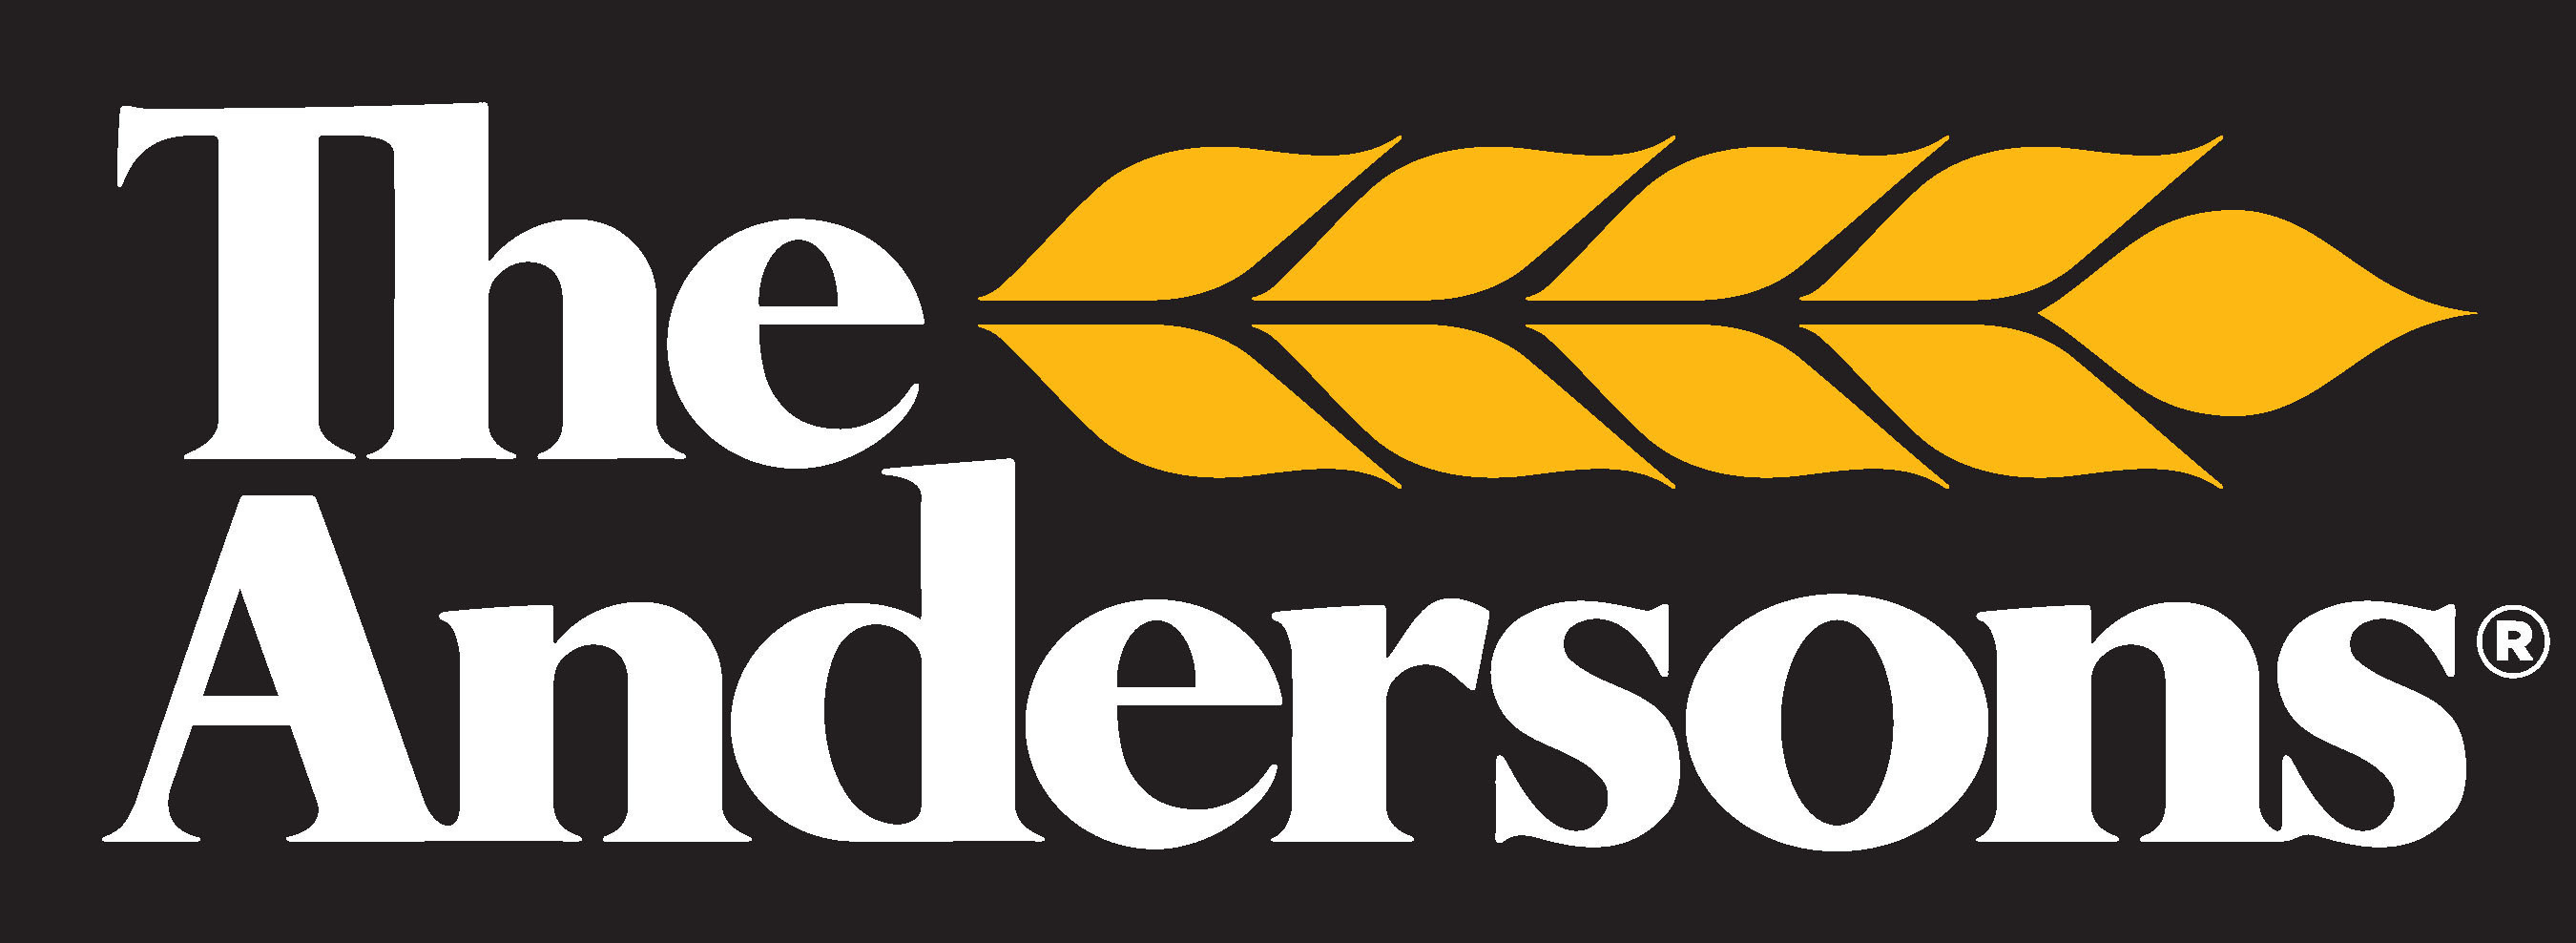 The Andersons, Inc. logo.